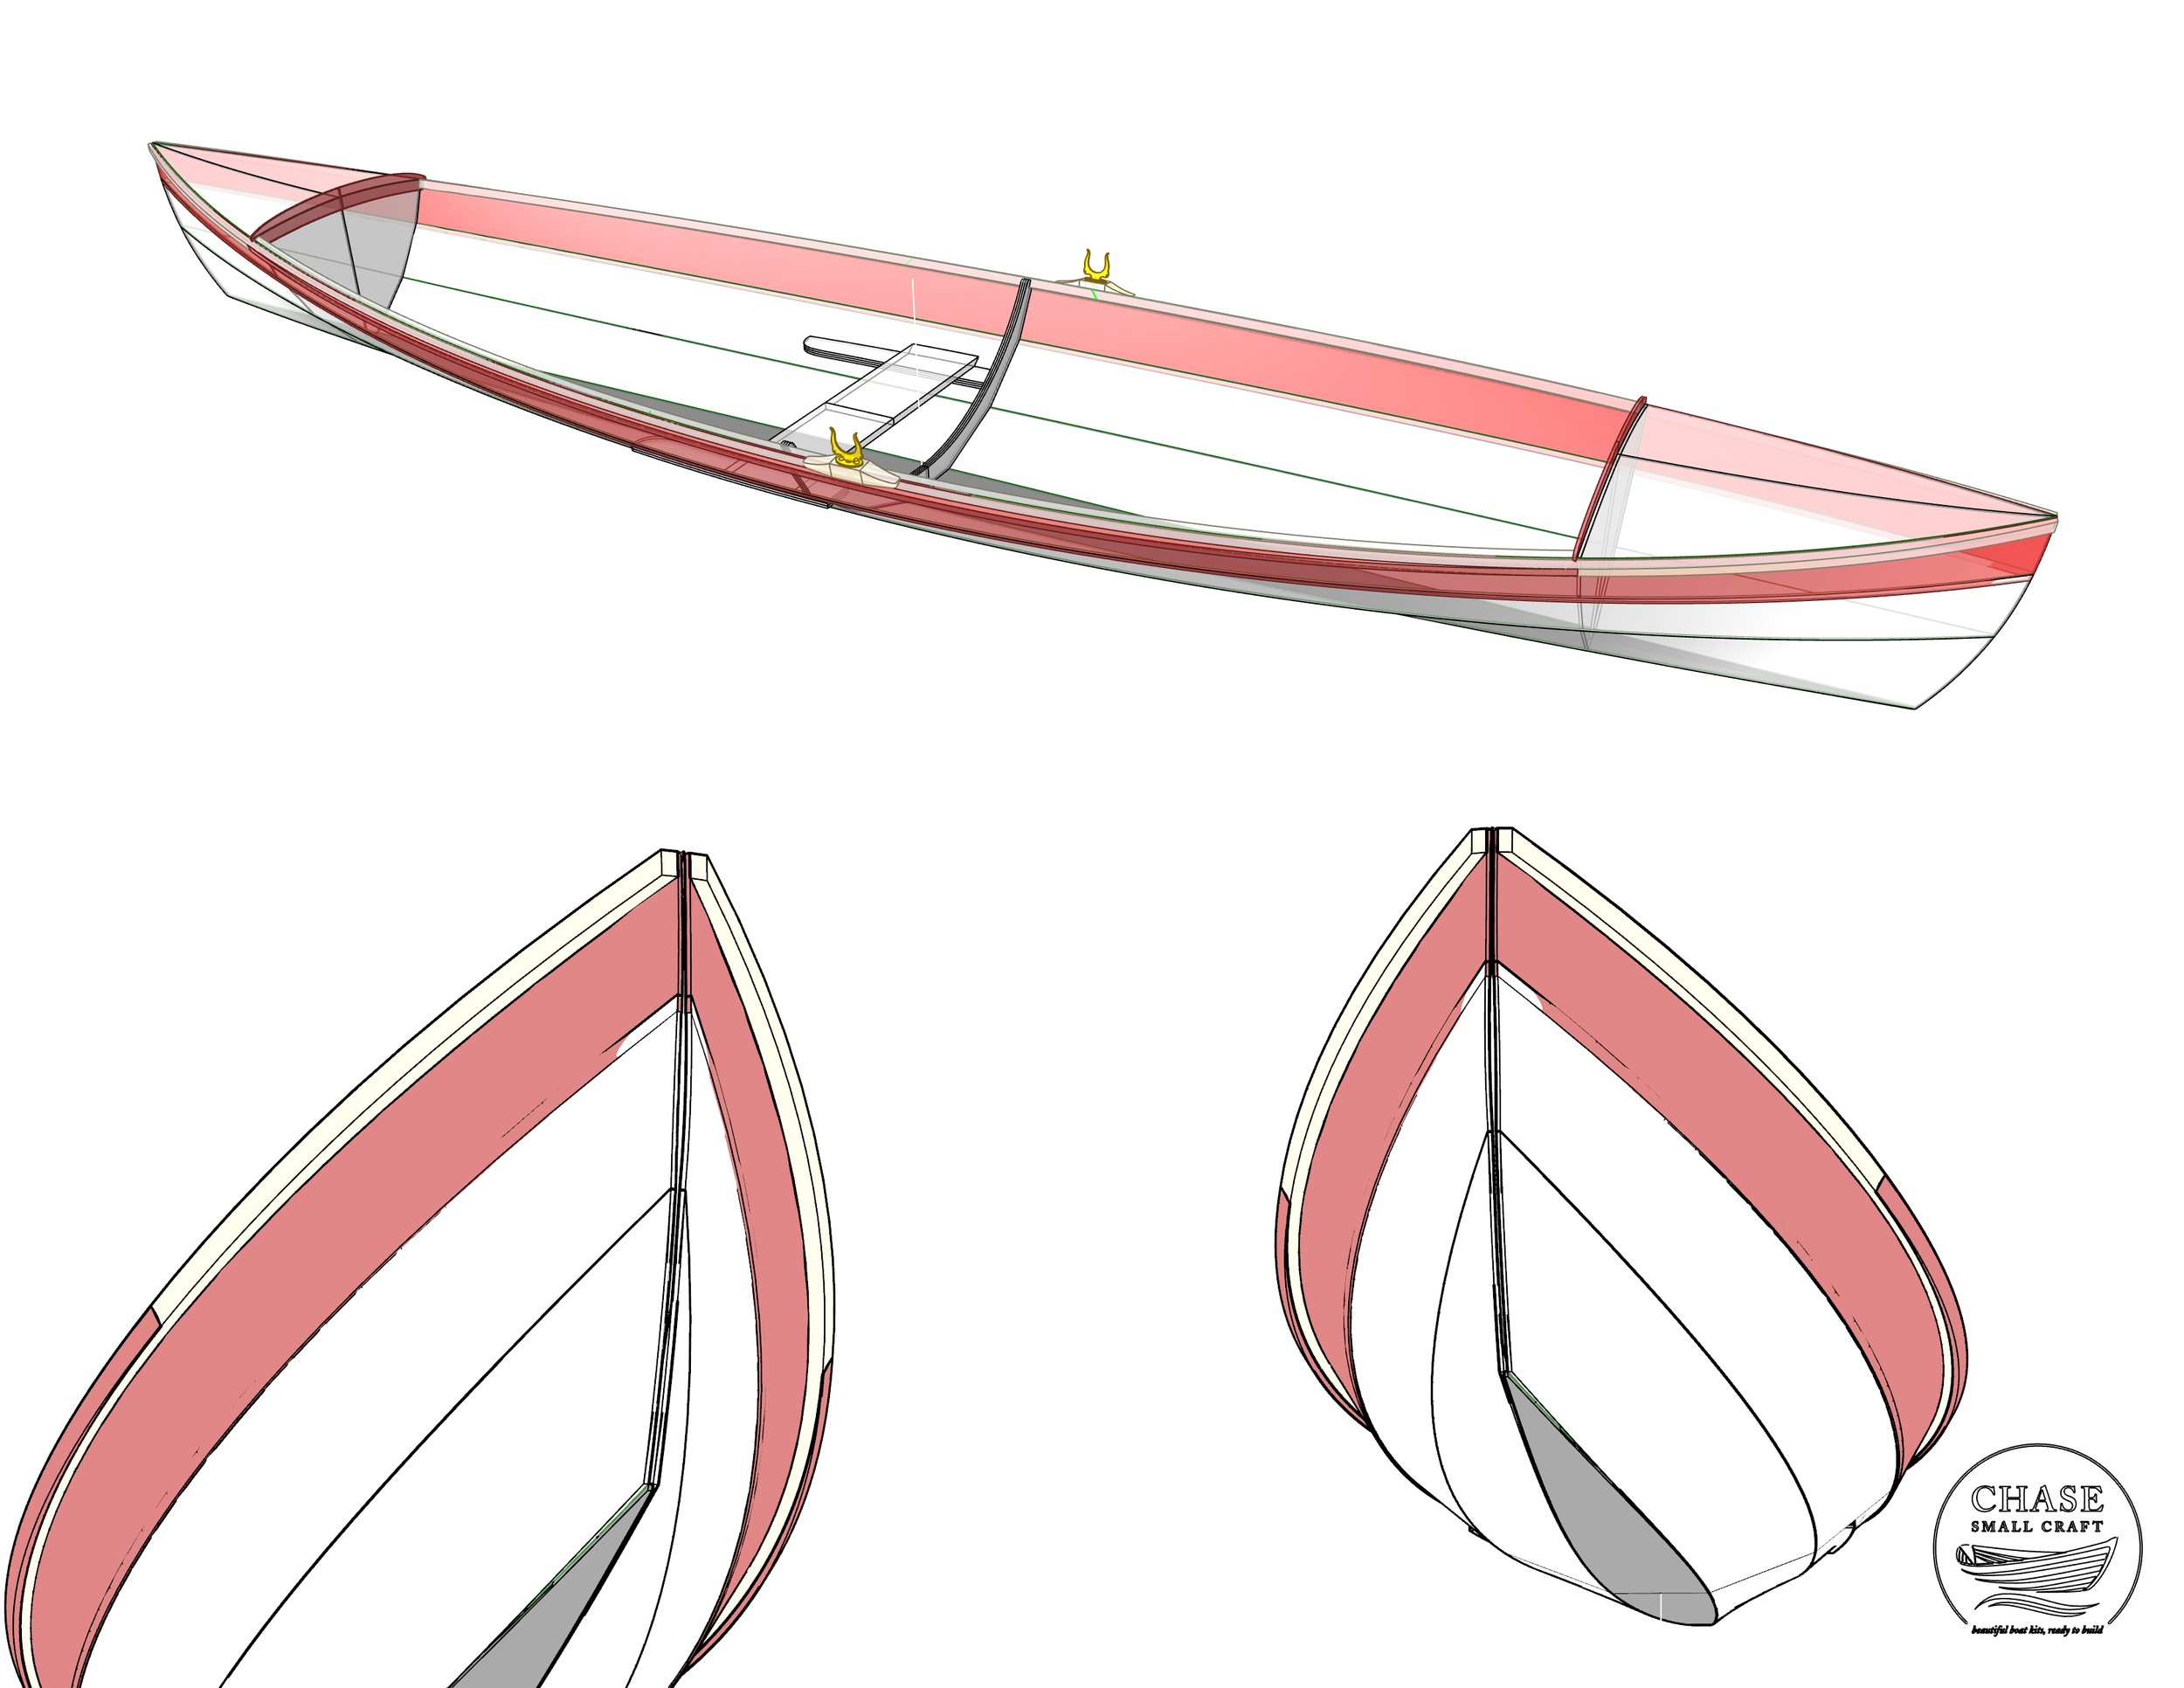 Wherry for fast, fixed seat rowing